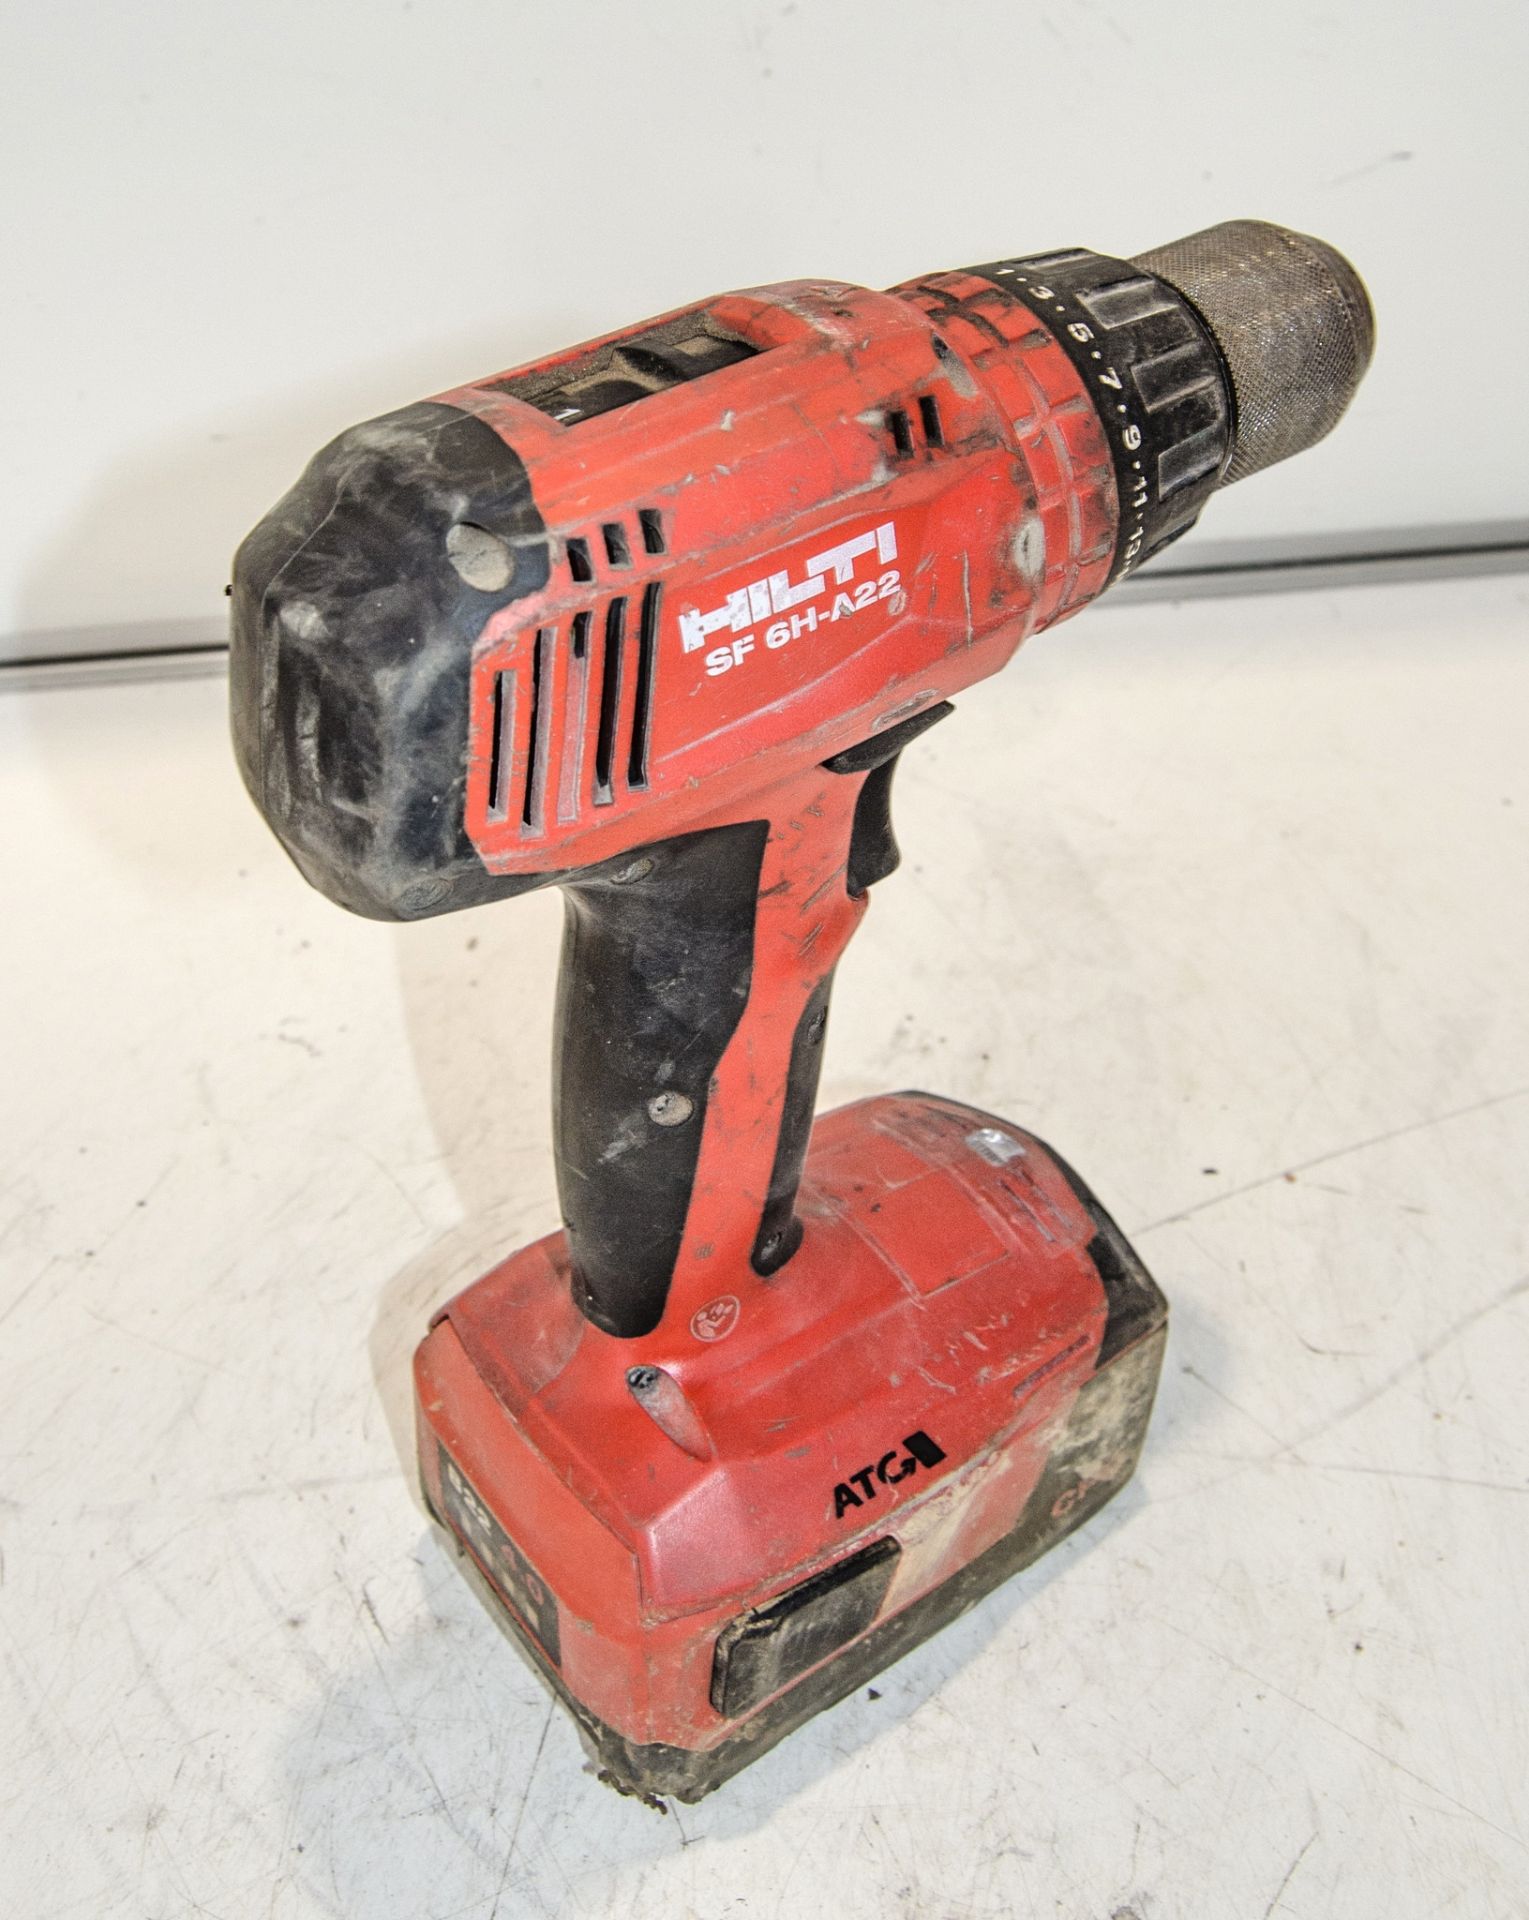 Hilti SF 6H-A22 22v cordless power drill c/w battery ** No charger ** 22BD1703 - Image 2 of 2